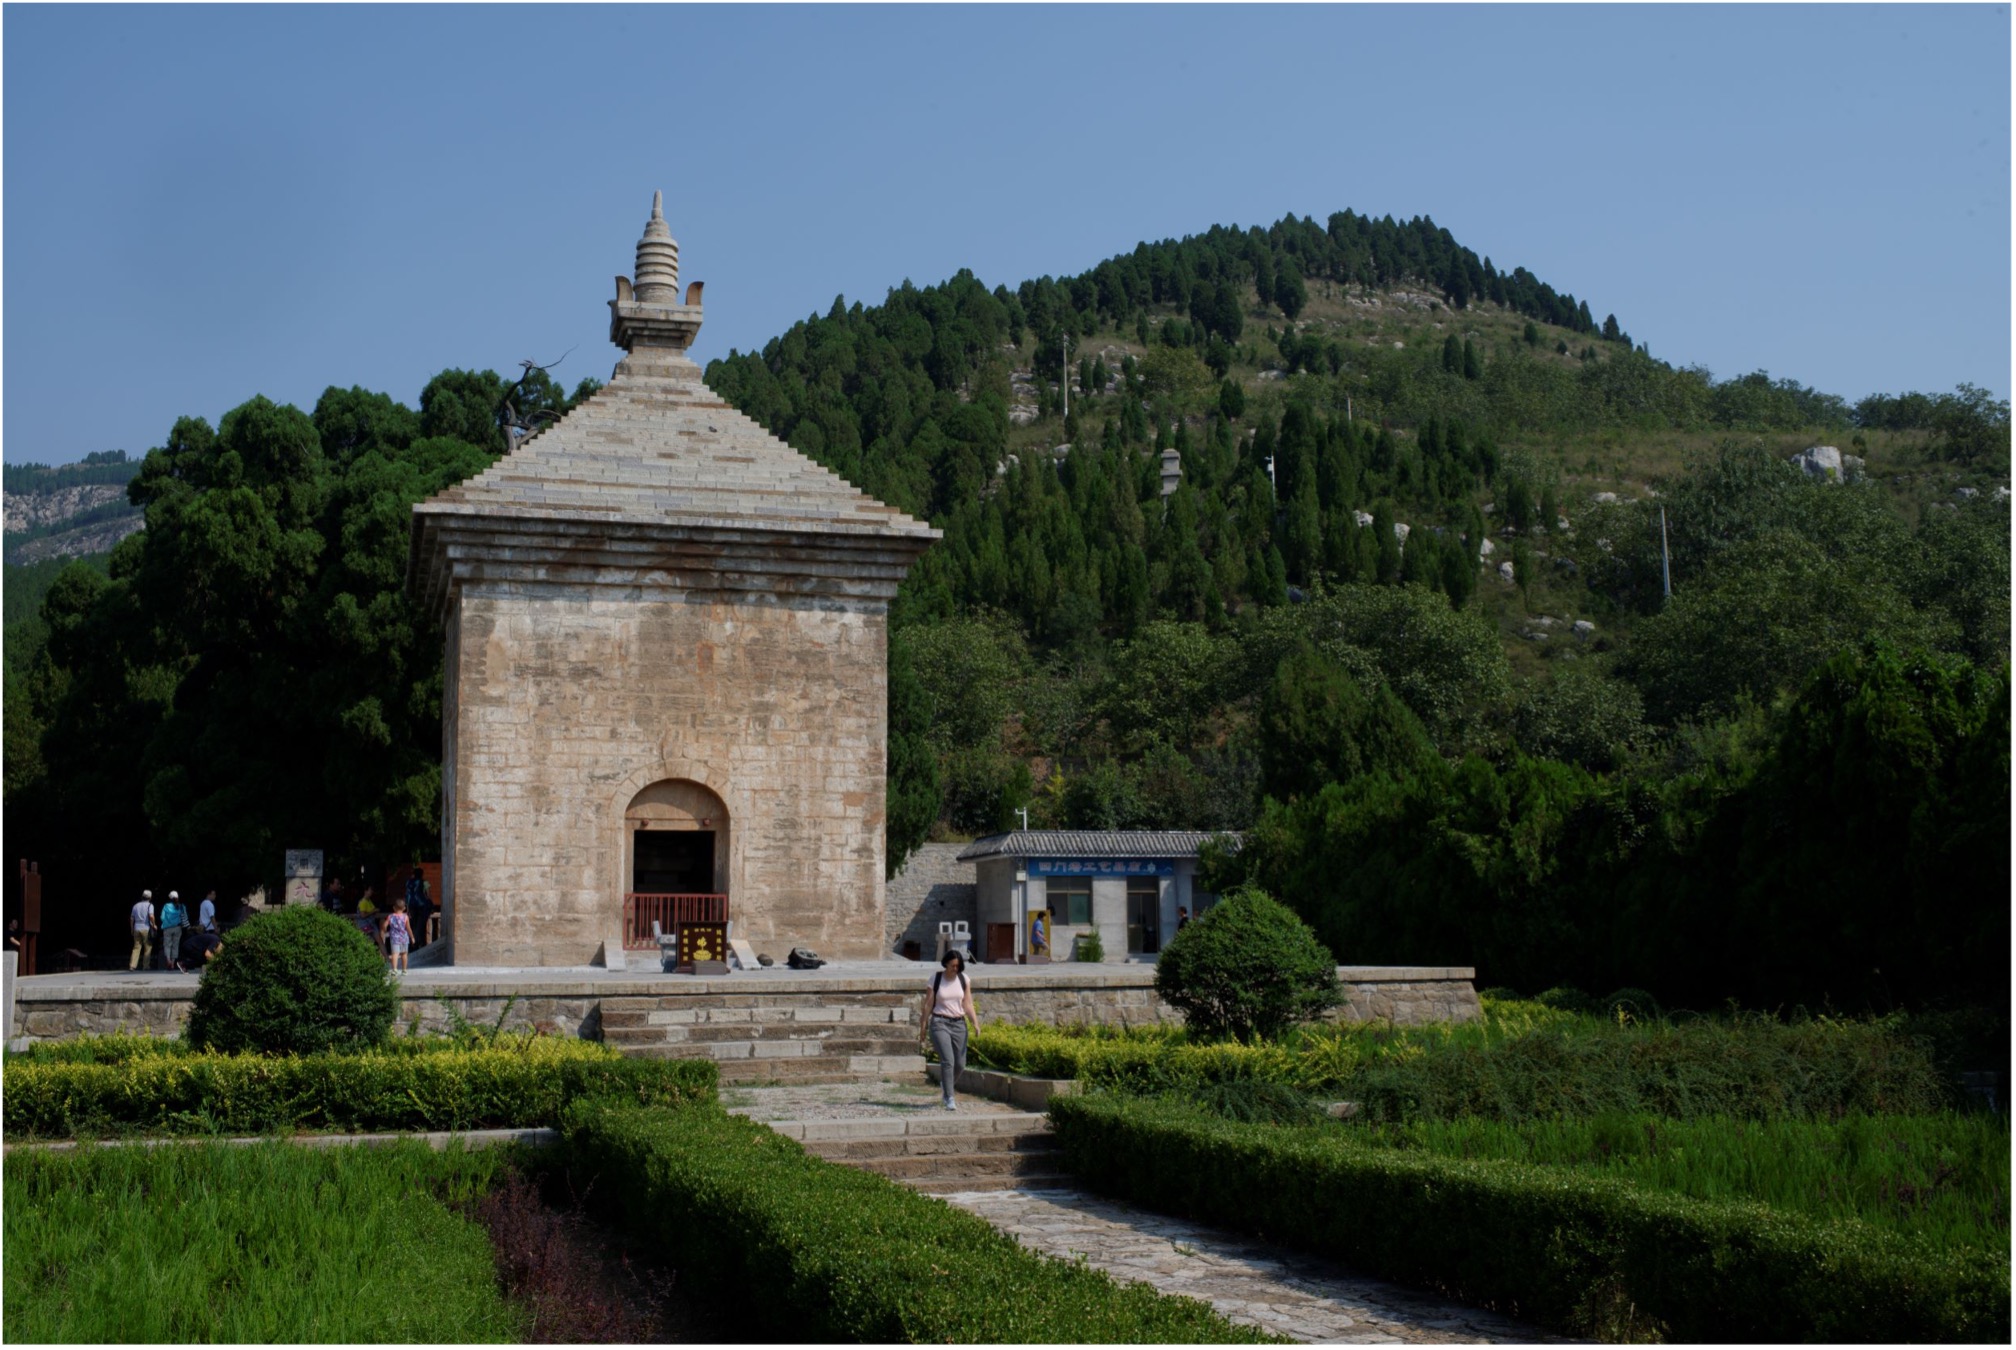 A picture of The famous four-gate stupa of Shentong Monastery, one of the earliest surviving Buddhist stone buildings in China.